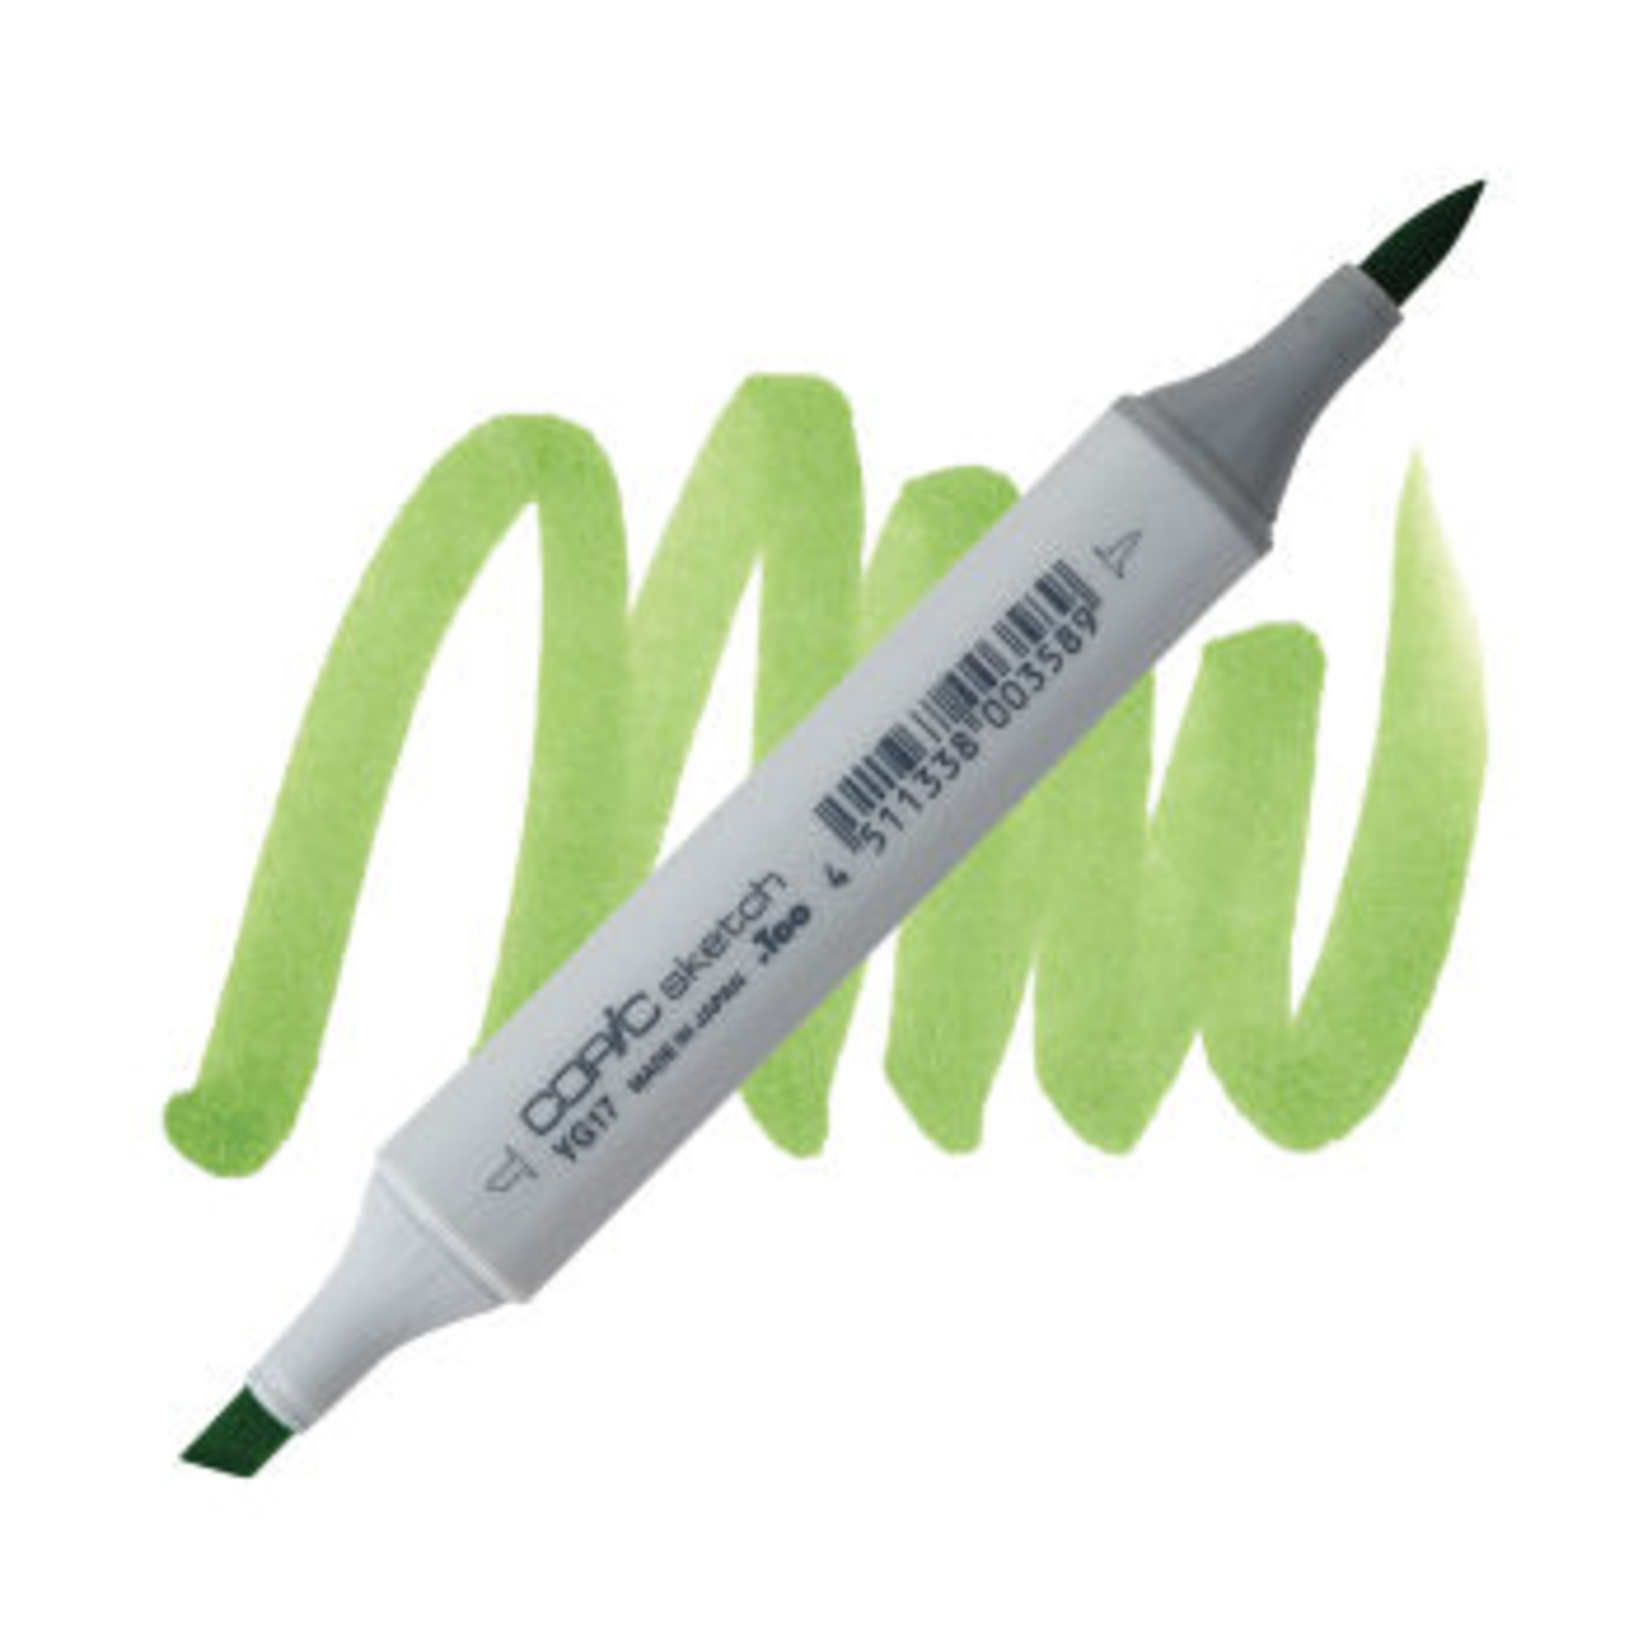 Copic Copic Marker Yg17 - Grass Green